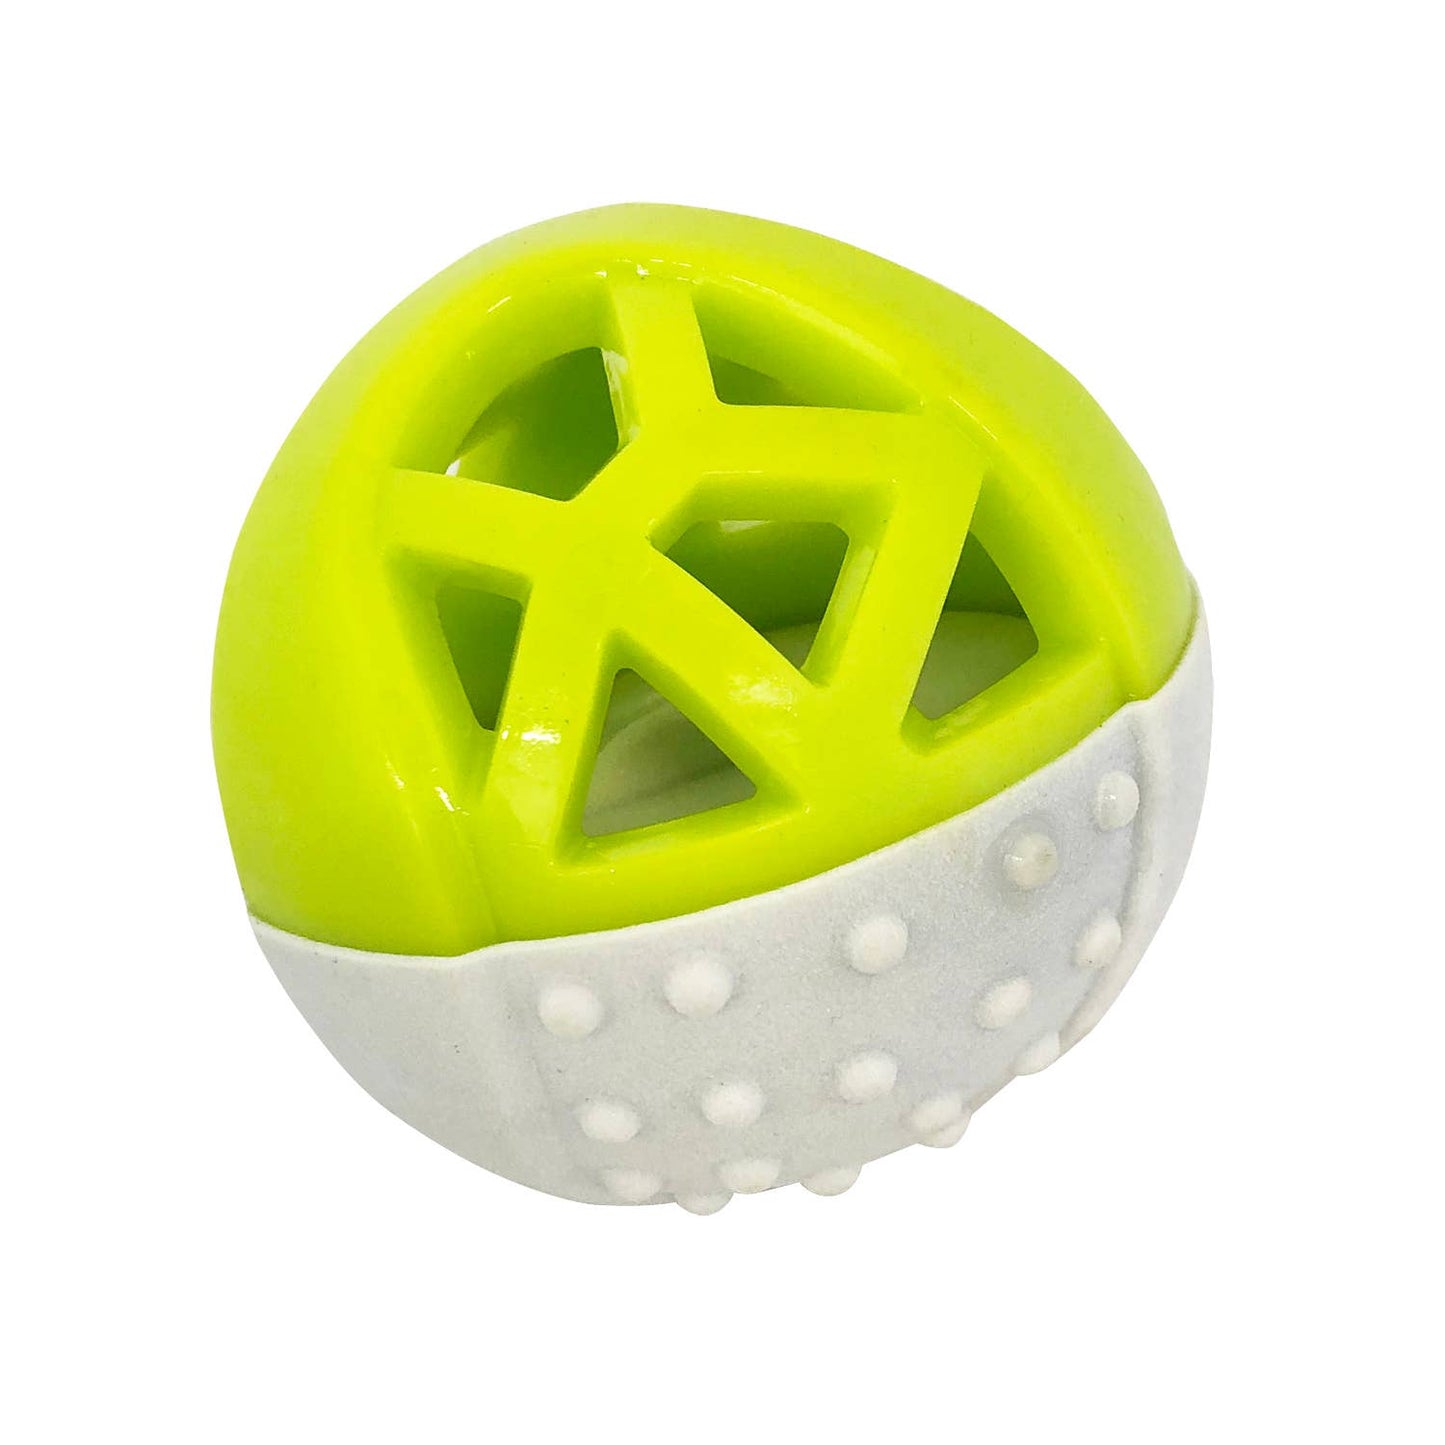 Totally Pooched Catch n' Squeak Ball Foam Rubber Grey/Green